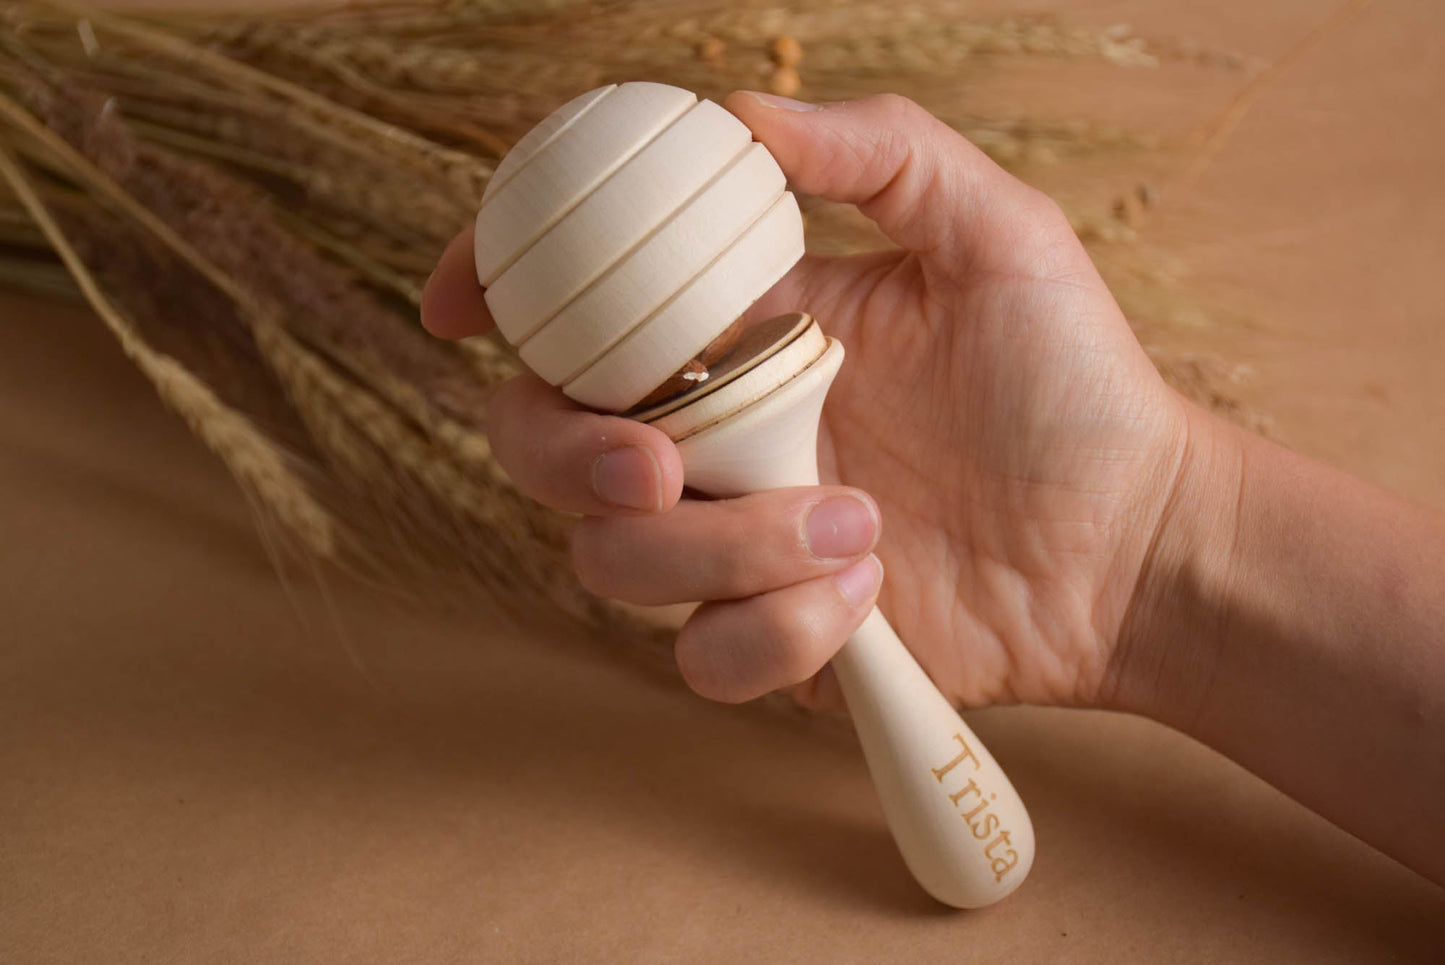 Wooden maracas, Wooden baby rattle, Toddler childrens wooden toys, Musical toy, Baby maracas, Kids room decor, Eco toys, Natural toys